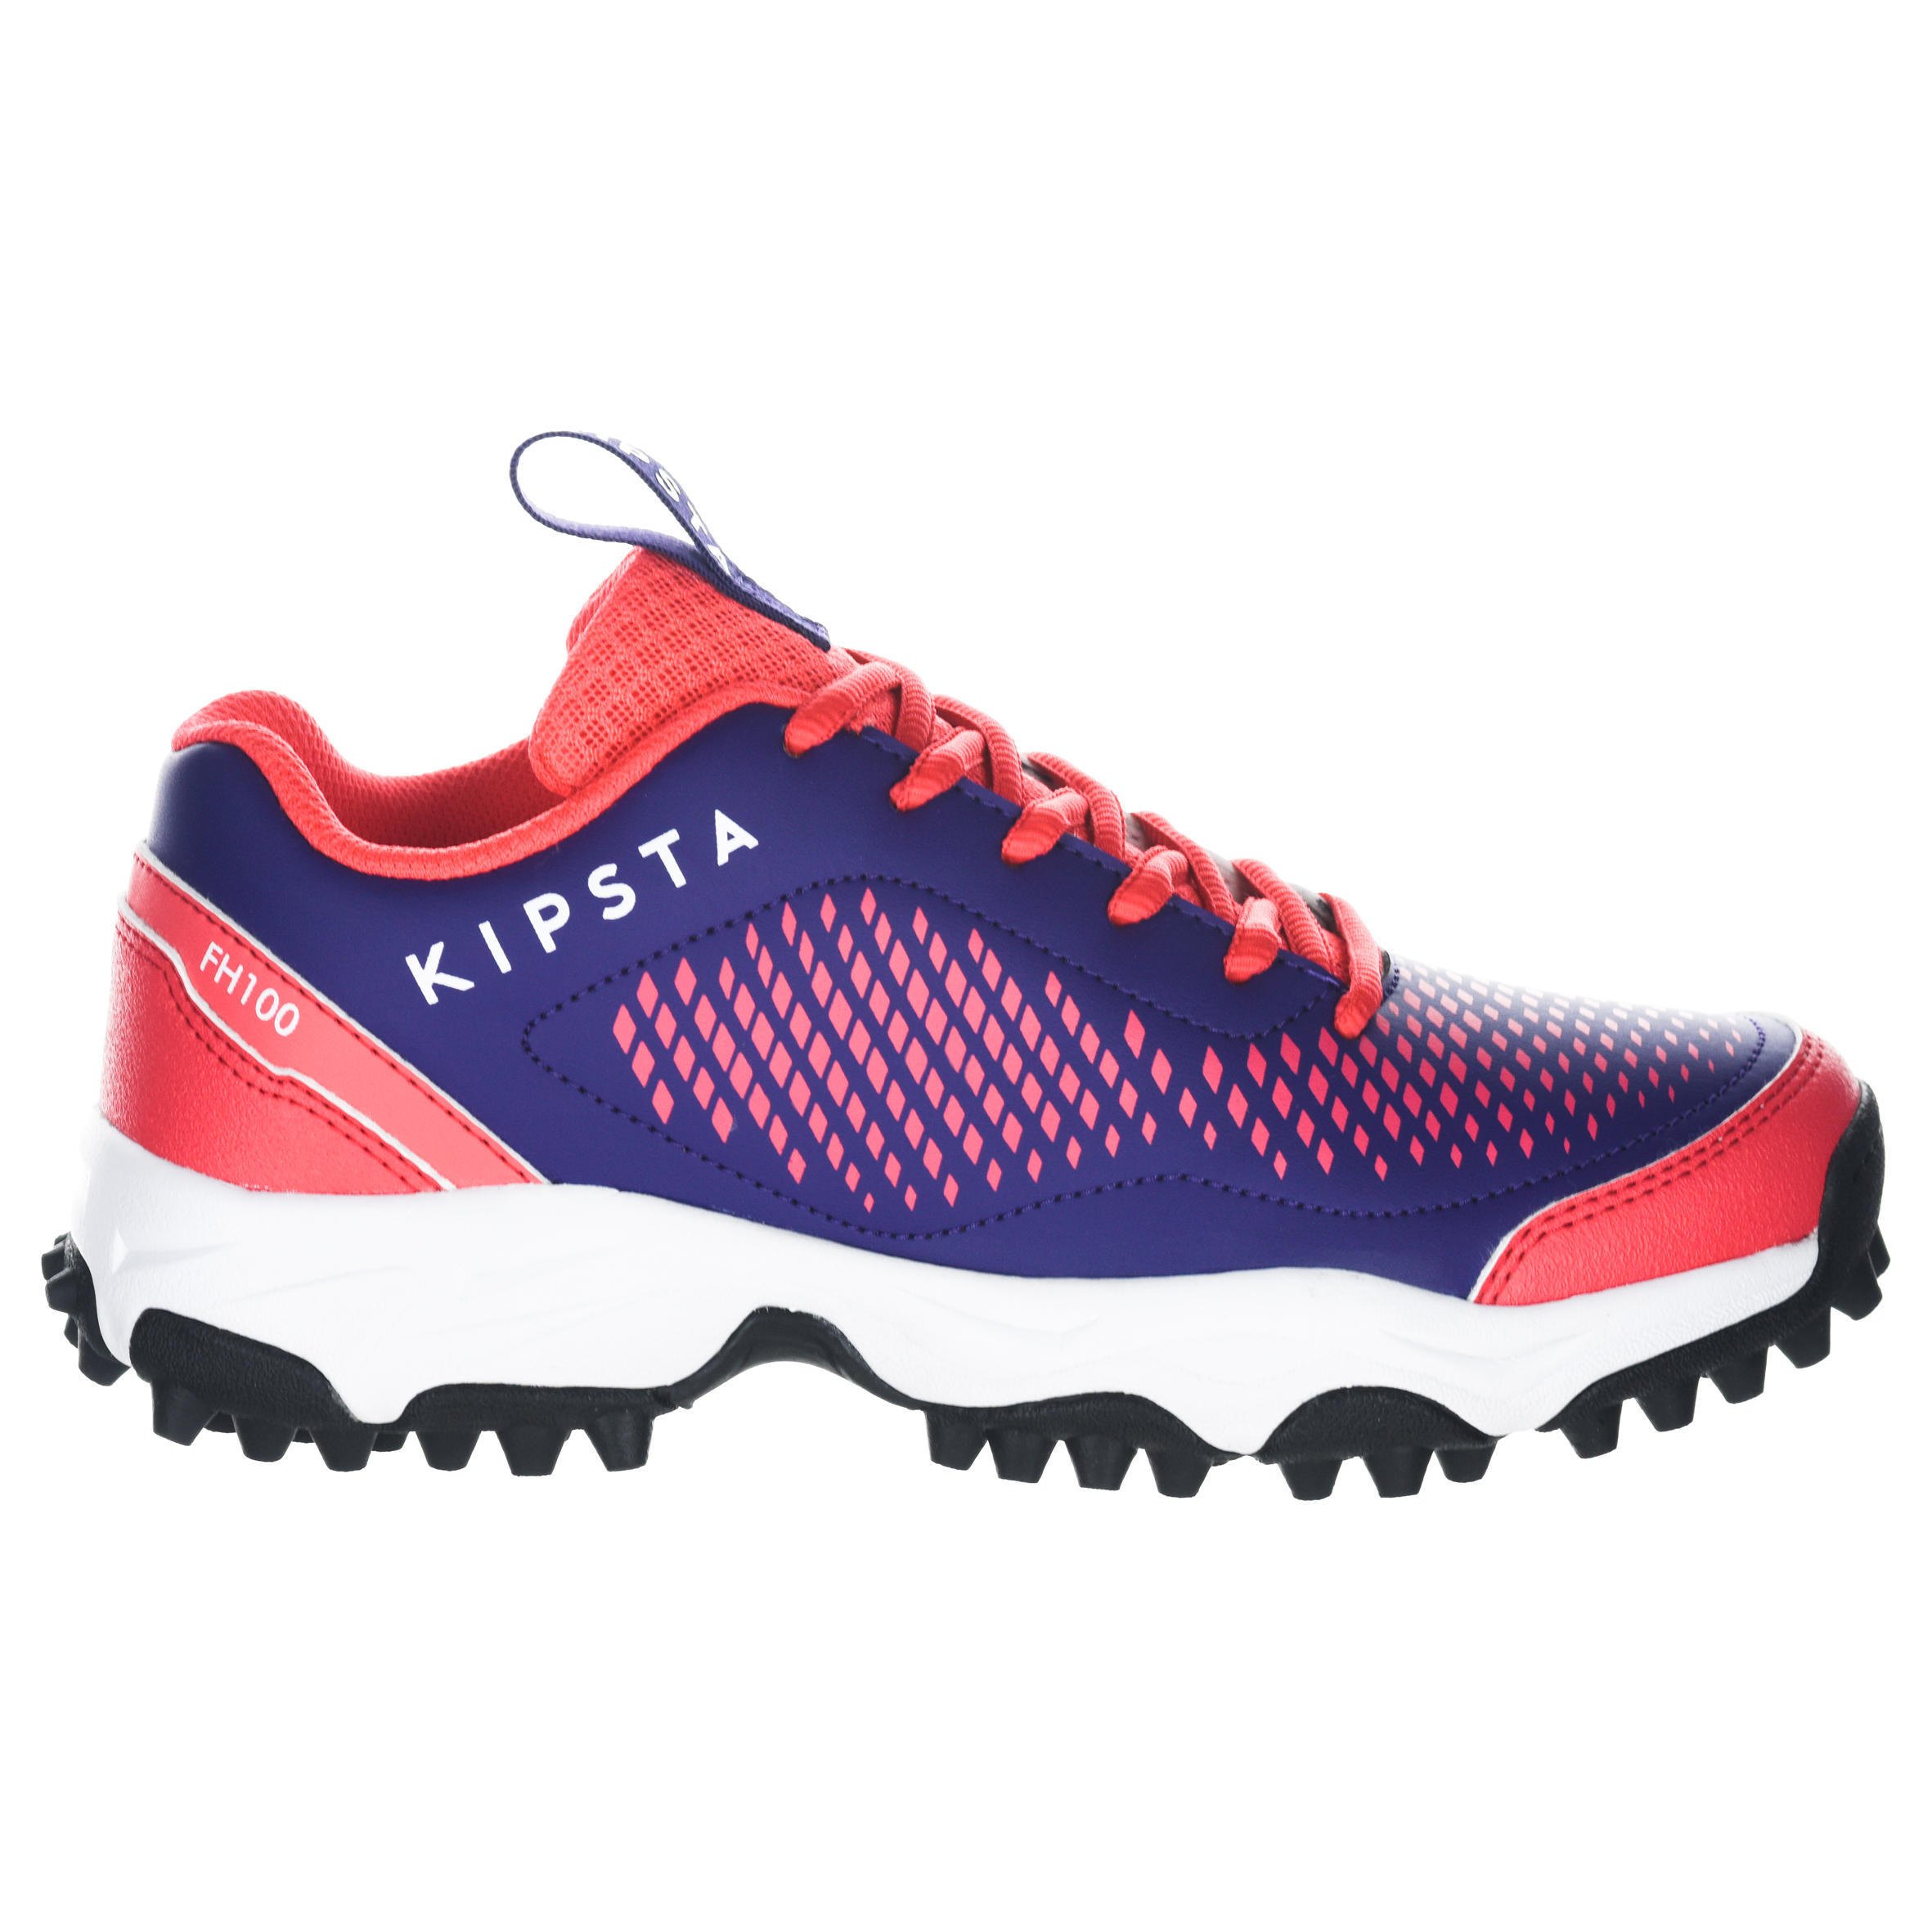 FH100 Kids' Low to Medium Intensity Field Hockey Shoes - Pink 2/13